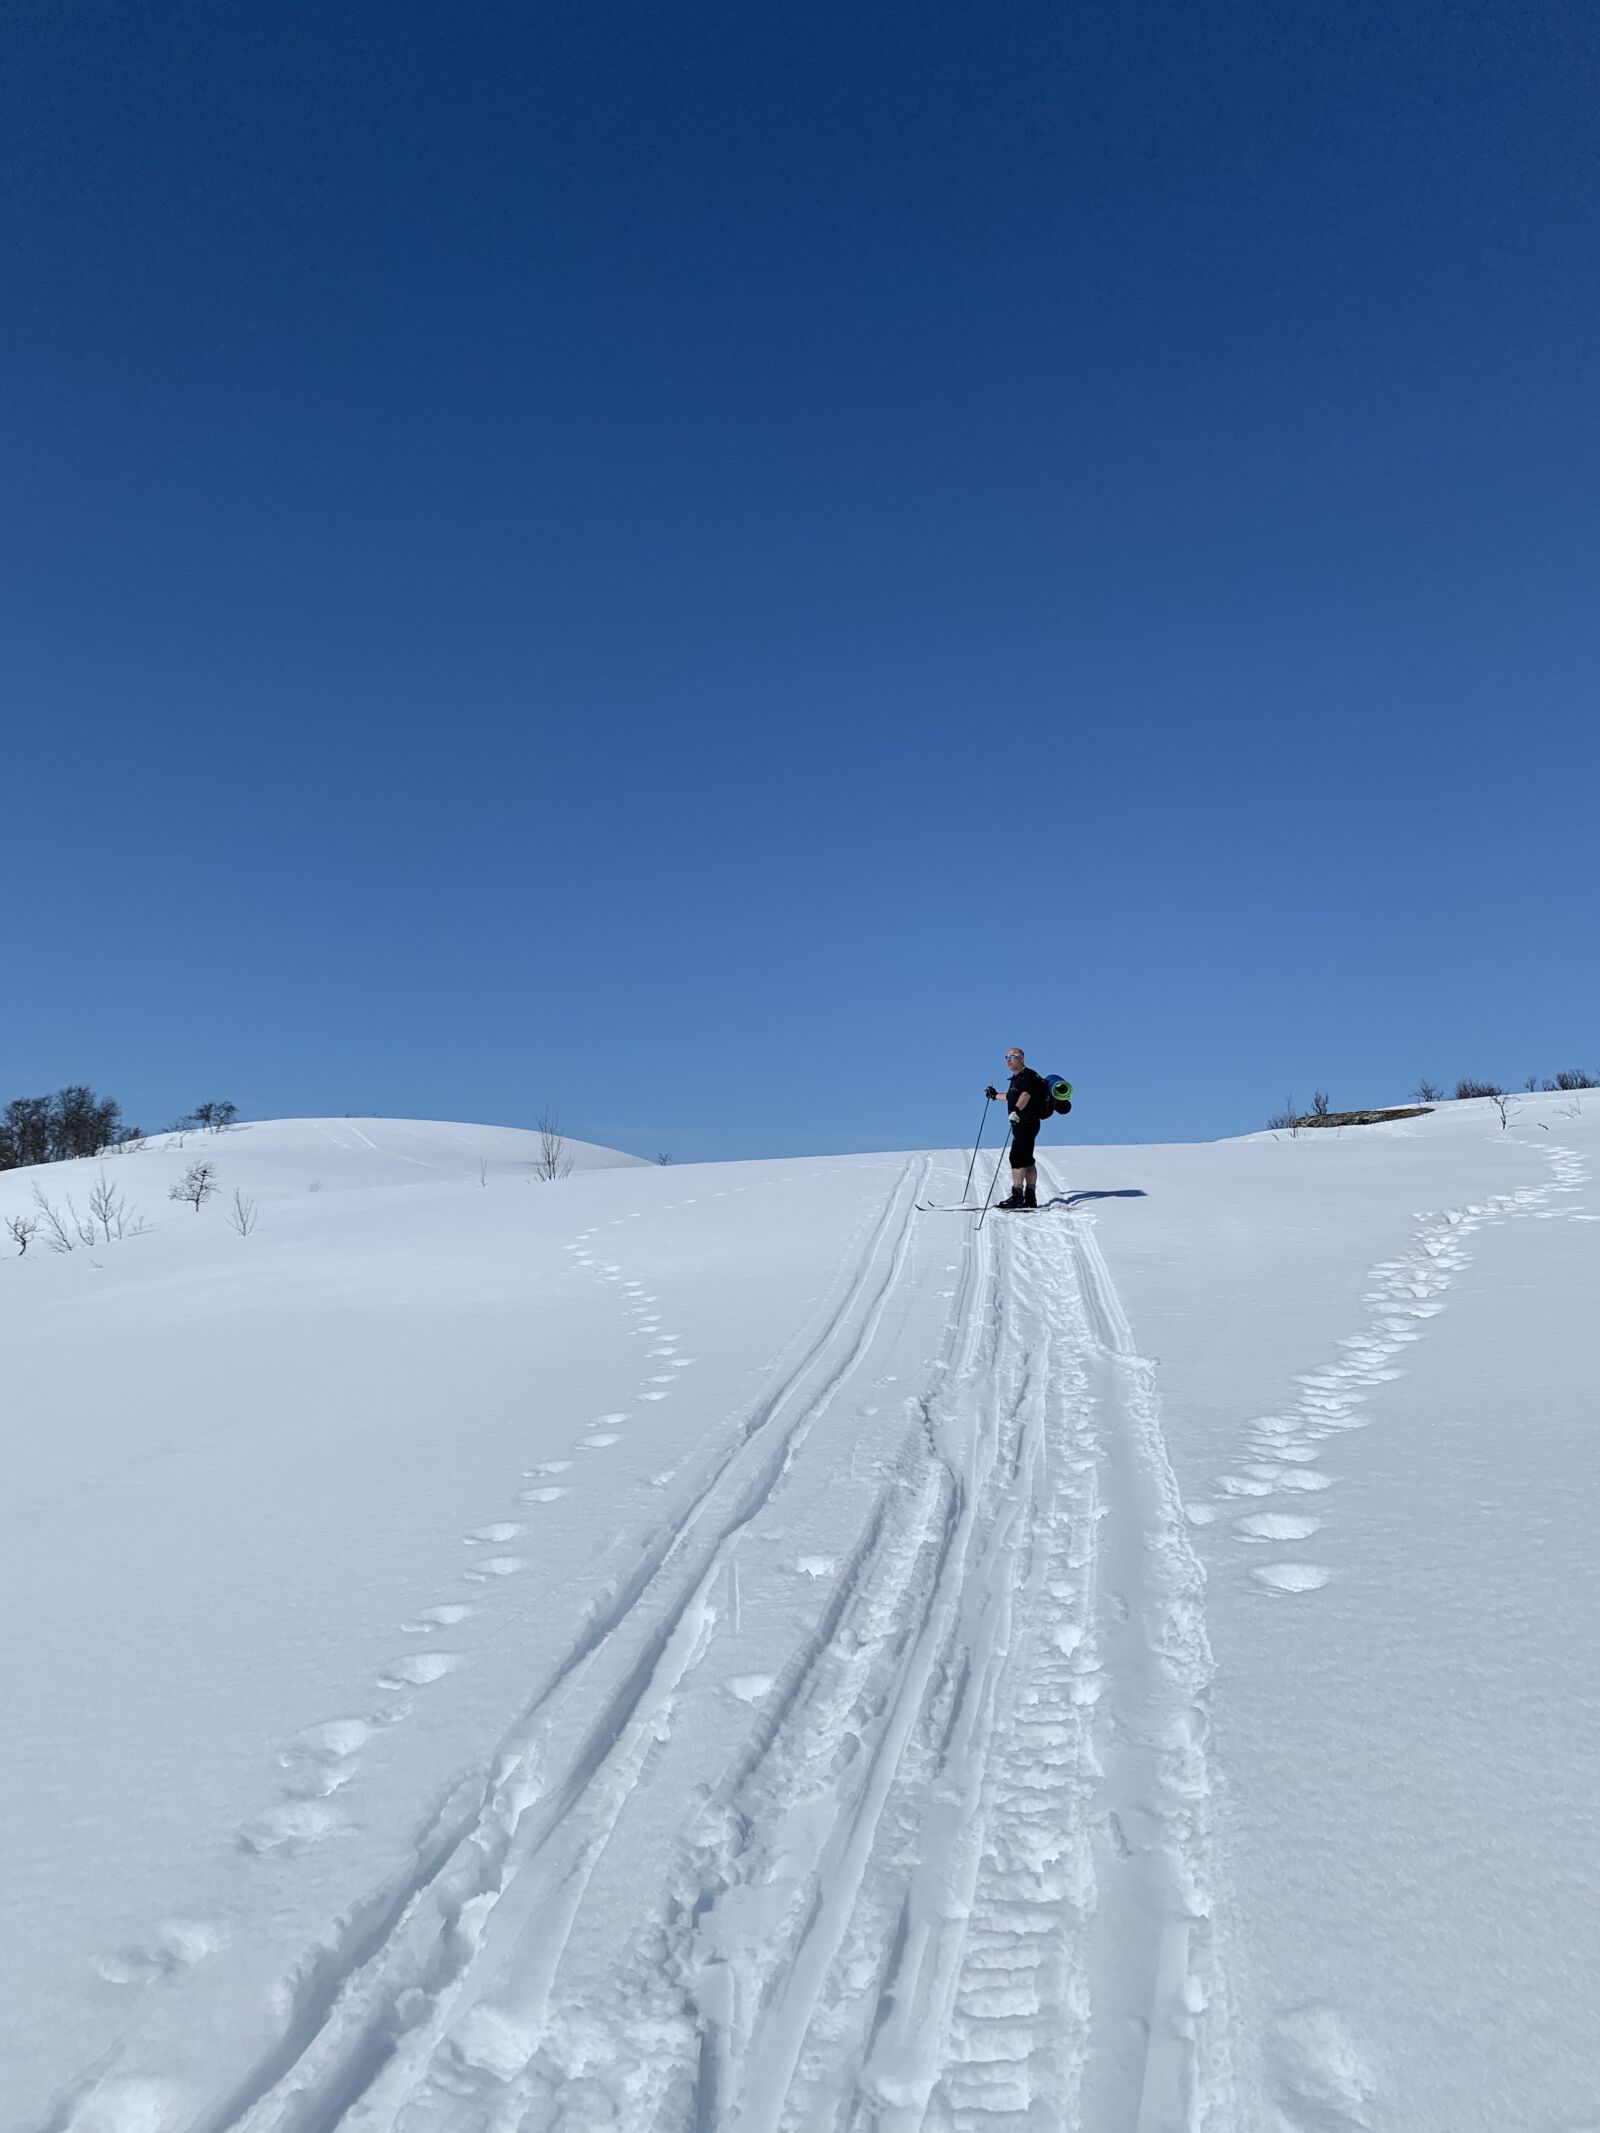 Apple iPhone XR sample photo. Skiing, cross-country skiing, white photography